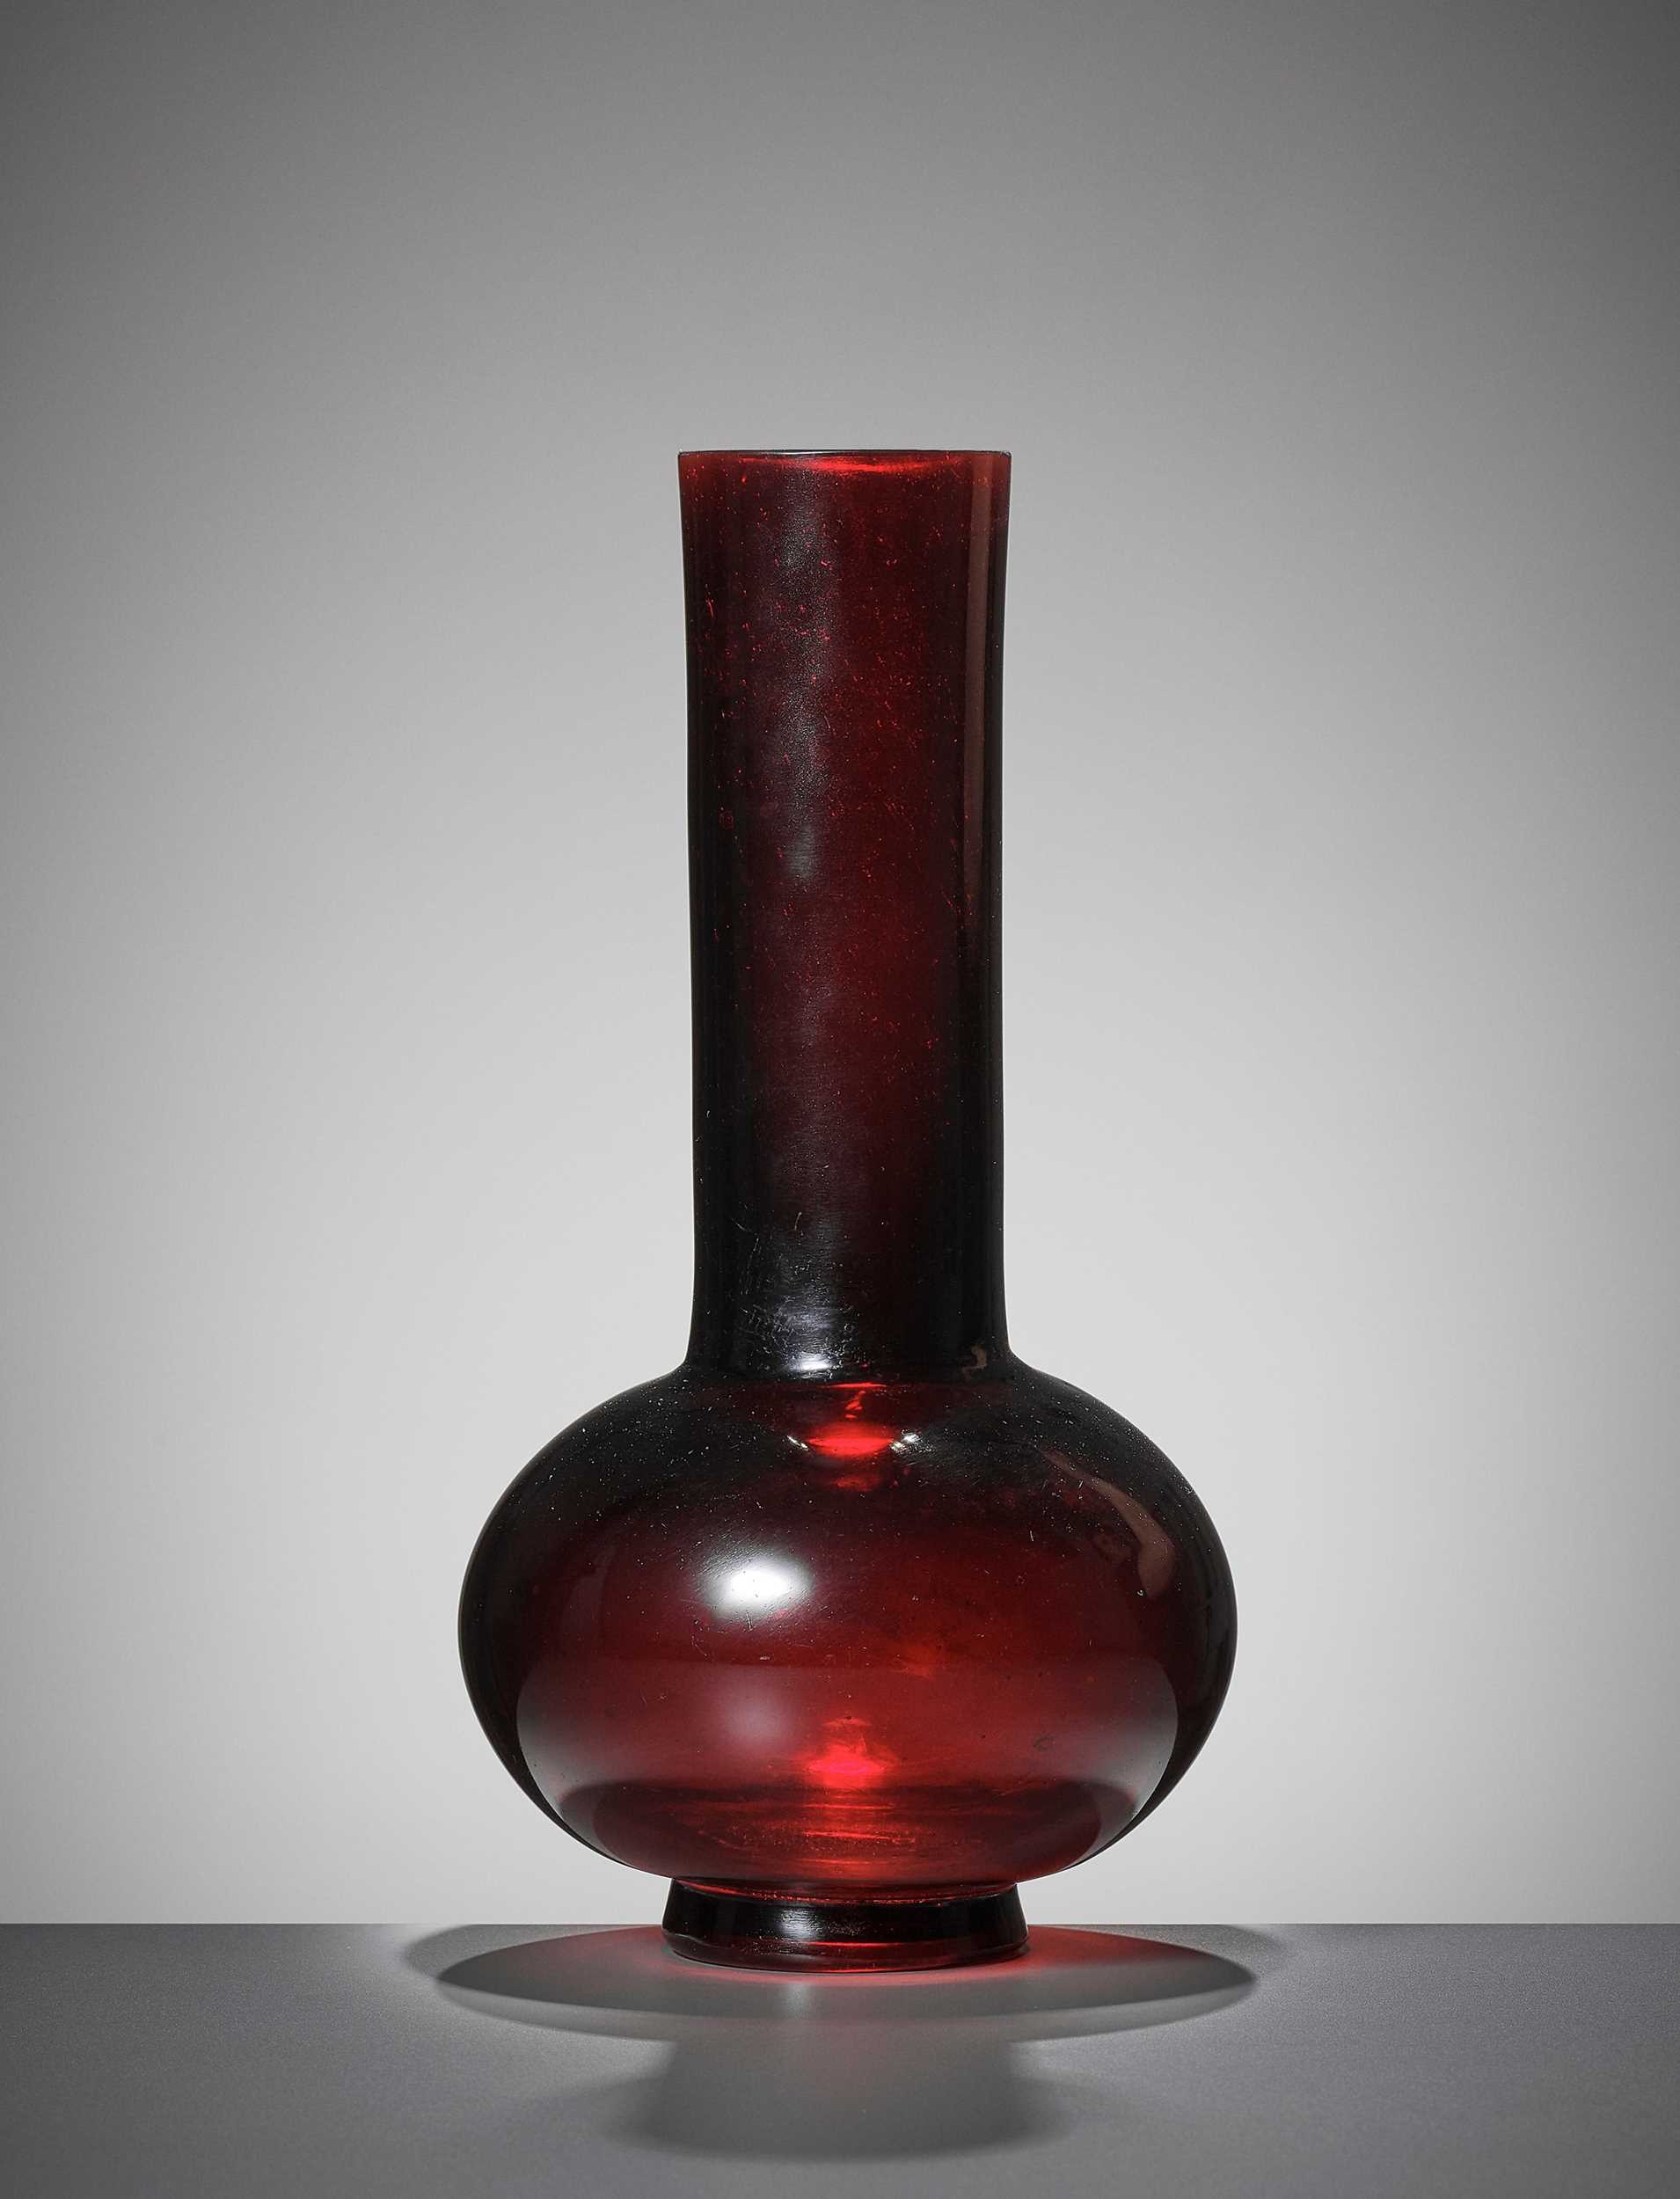 Lot 6 - A RUBY-RED GLASS BOTTLE VASE, QIANLONG MARK AND PERIOD